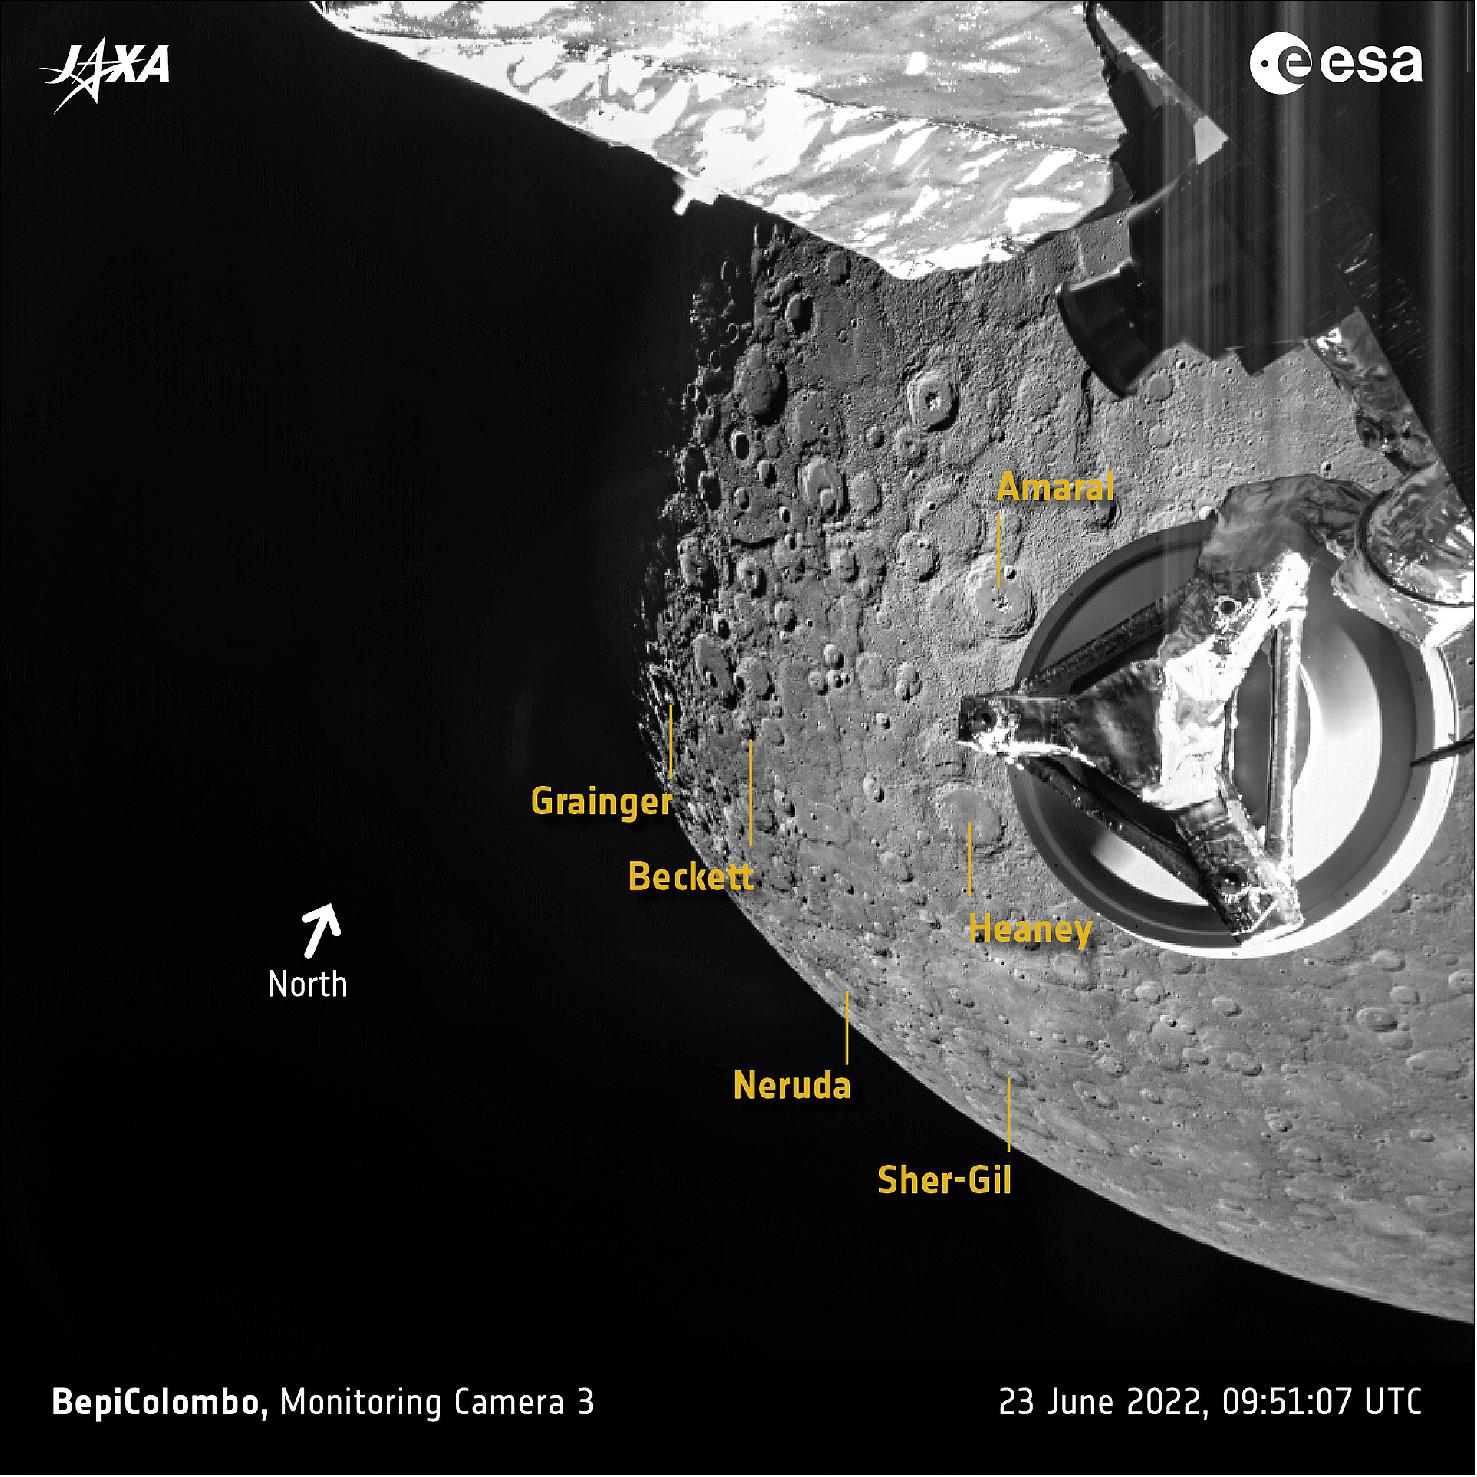 Figure 18: The search for volcanoes,annotated (image credit: ESA/BepiColombo/MTM, CC BY-SA 3.0 IGO)